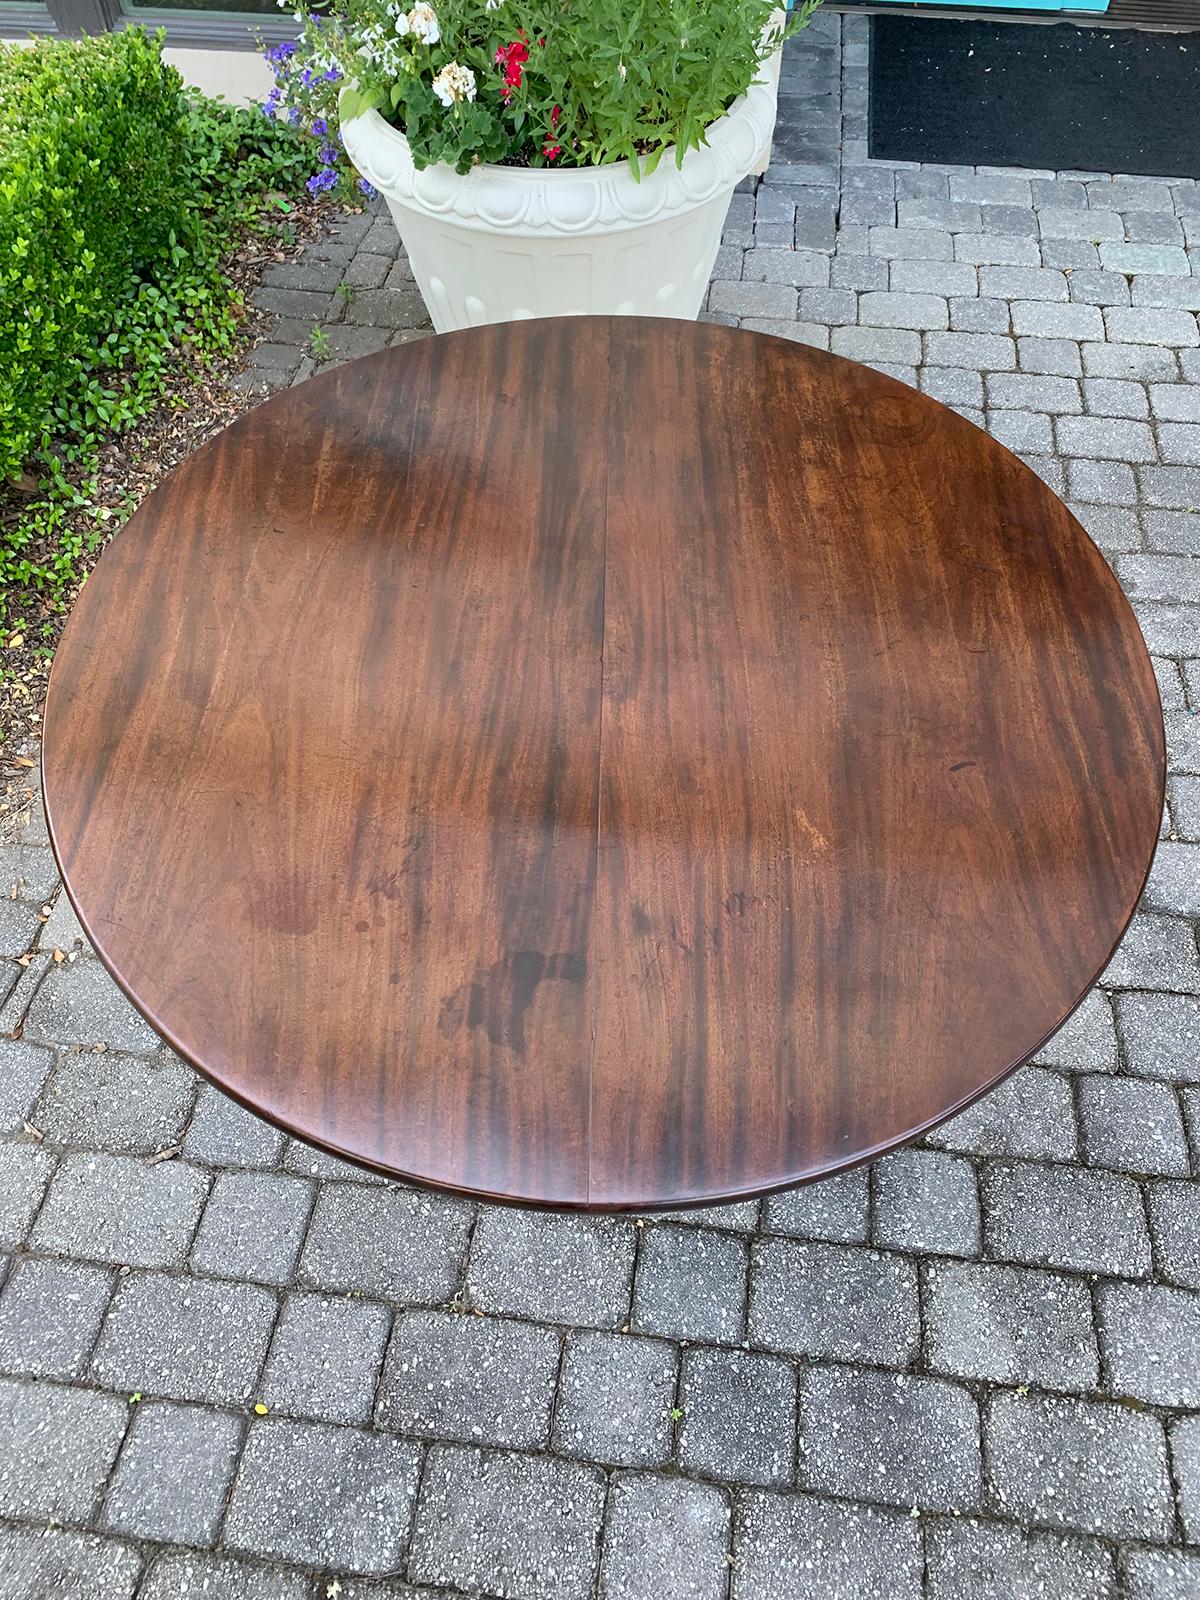 Wood Early 19th Century Regency Style Round Mahogany Tilt-Top Pedestal Table